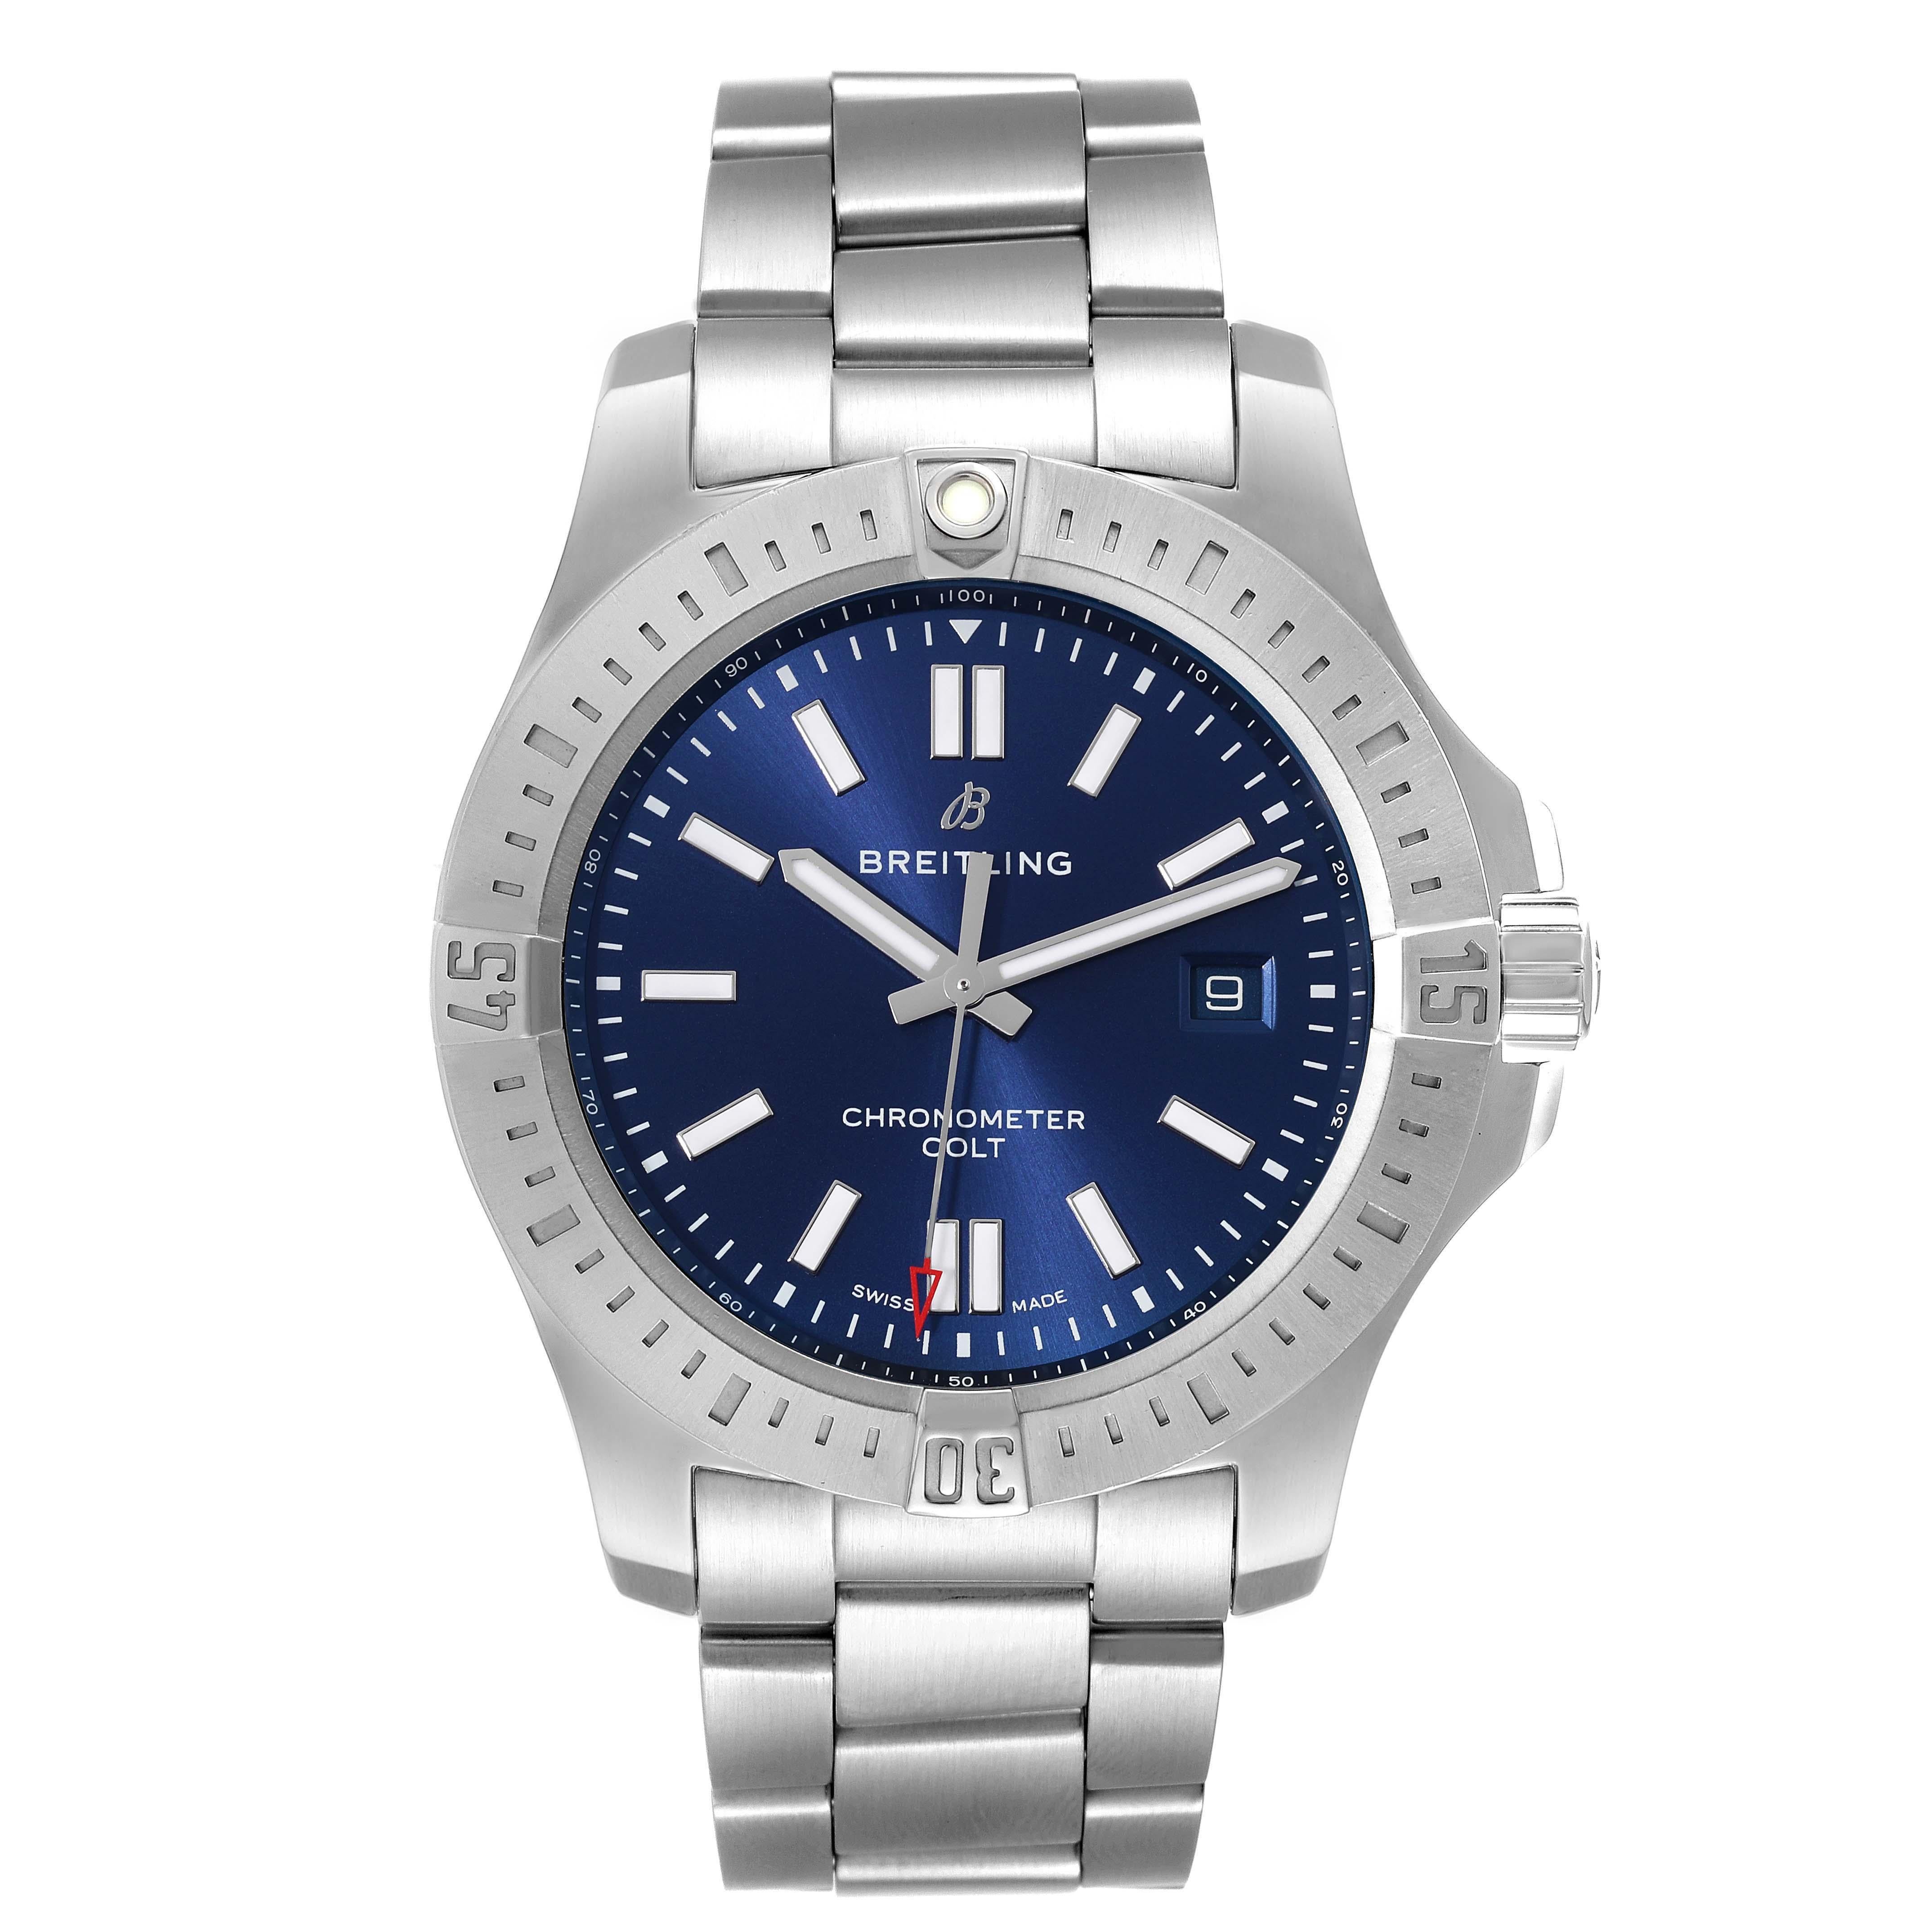 Breitling Colt Blue Dial Automatic Steel Mens Watch A17388 Box Card. Automatic self-winding chronometer movement. Stainless steel case 44.0 mm in diameter. Breitling logo on a crown. Case thickness: 11.25 mm. Stainless steel unidirectional rotating